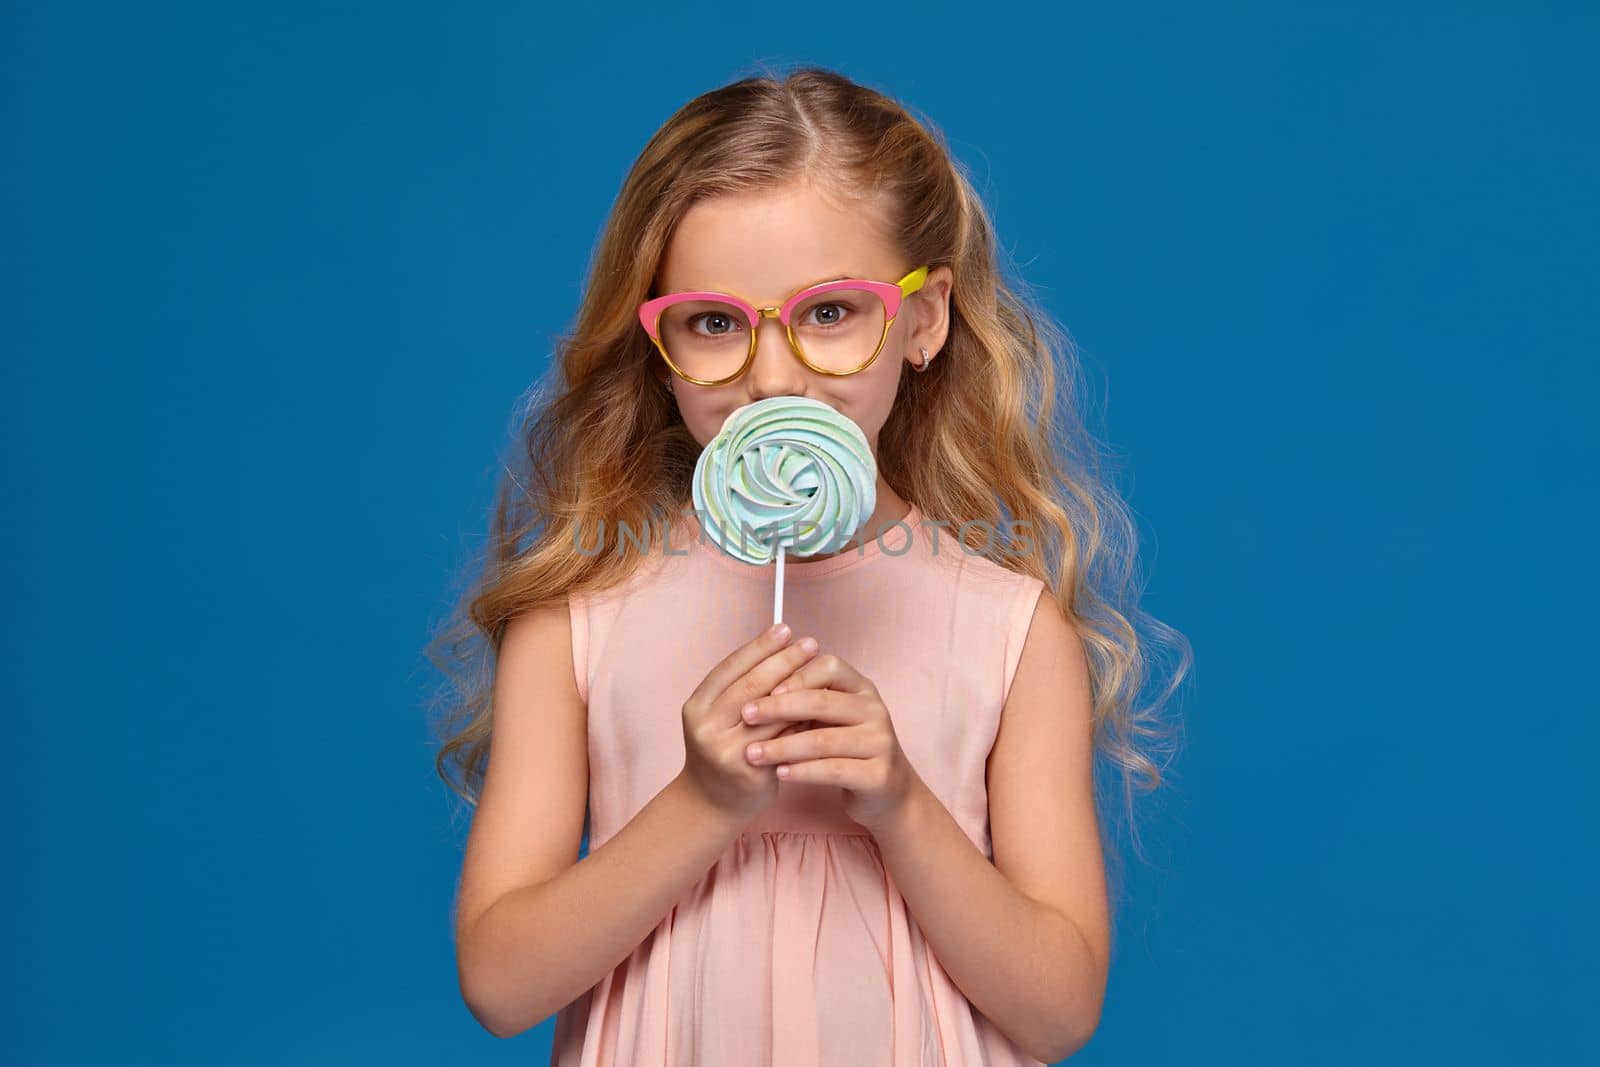 Fashionable little girl in a pink dress and glasses, with a candy in her hands, standing on a blue background. by nazarovsergey